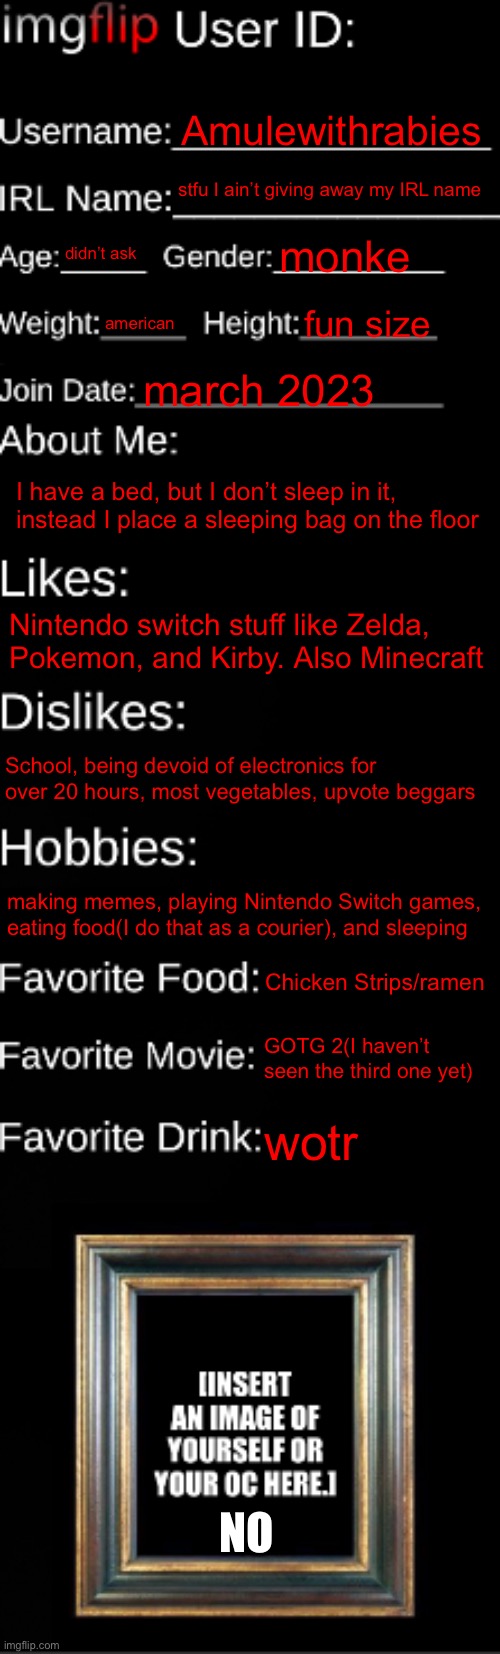 helo | Amulewithrabies; stfu I ain’t giving away my IRL name; didn’t ask; monke; american; fun size; march 2023; I have a bed, but I don’t sleep in it, instead I place a sleeping bag on the floor; Nintendo switch stuff like Zelda, Pokemon, and Kirby. Also Minecraft; School, being devoid of electronics for over 20 hours, most vegetables, upvote beggars; making memes, playing Nintendo Switch games, eating food(I do that as a courier), and sleeping; Chicken Strips/ramen; GOTG 2(I haven’t seen the third one yet); wotr; NO | image tagged in imgflip id card | made w/ Imgflip meme maker